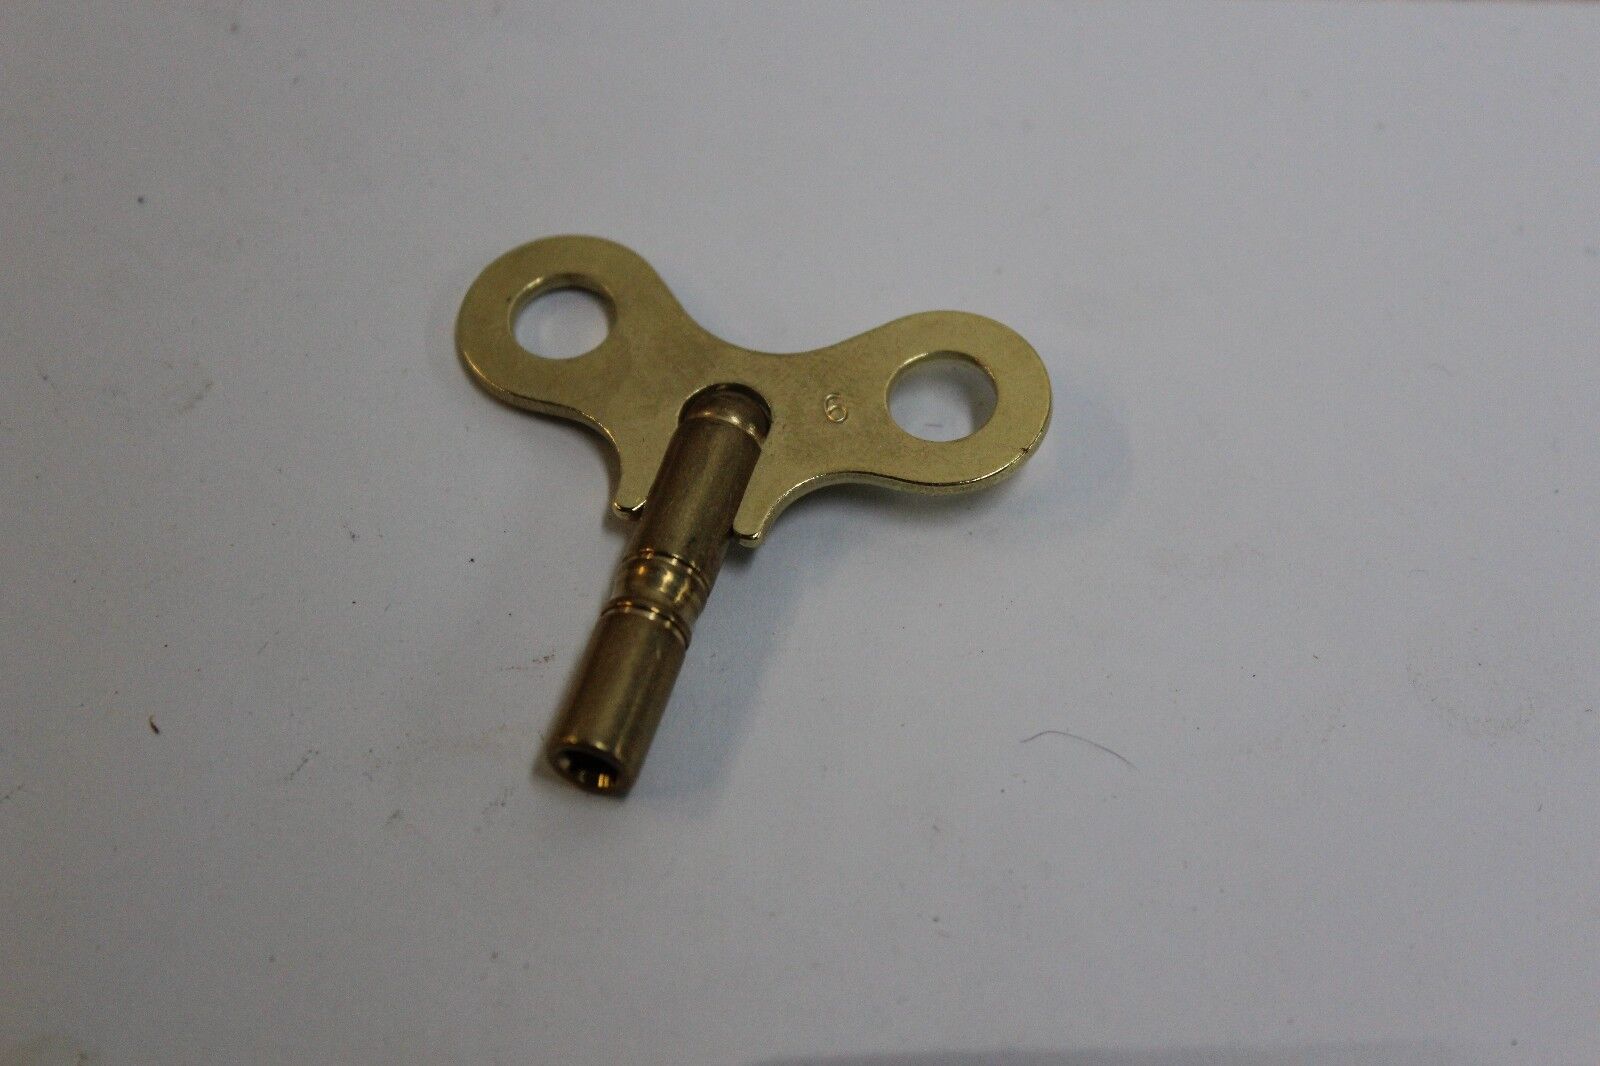 New Brass Replacement Clock Key Size 6 / 3.6 mm For Key Wind Clocks